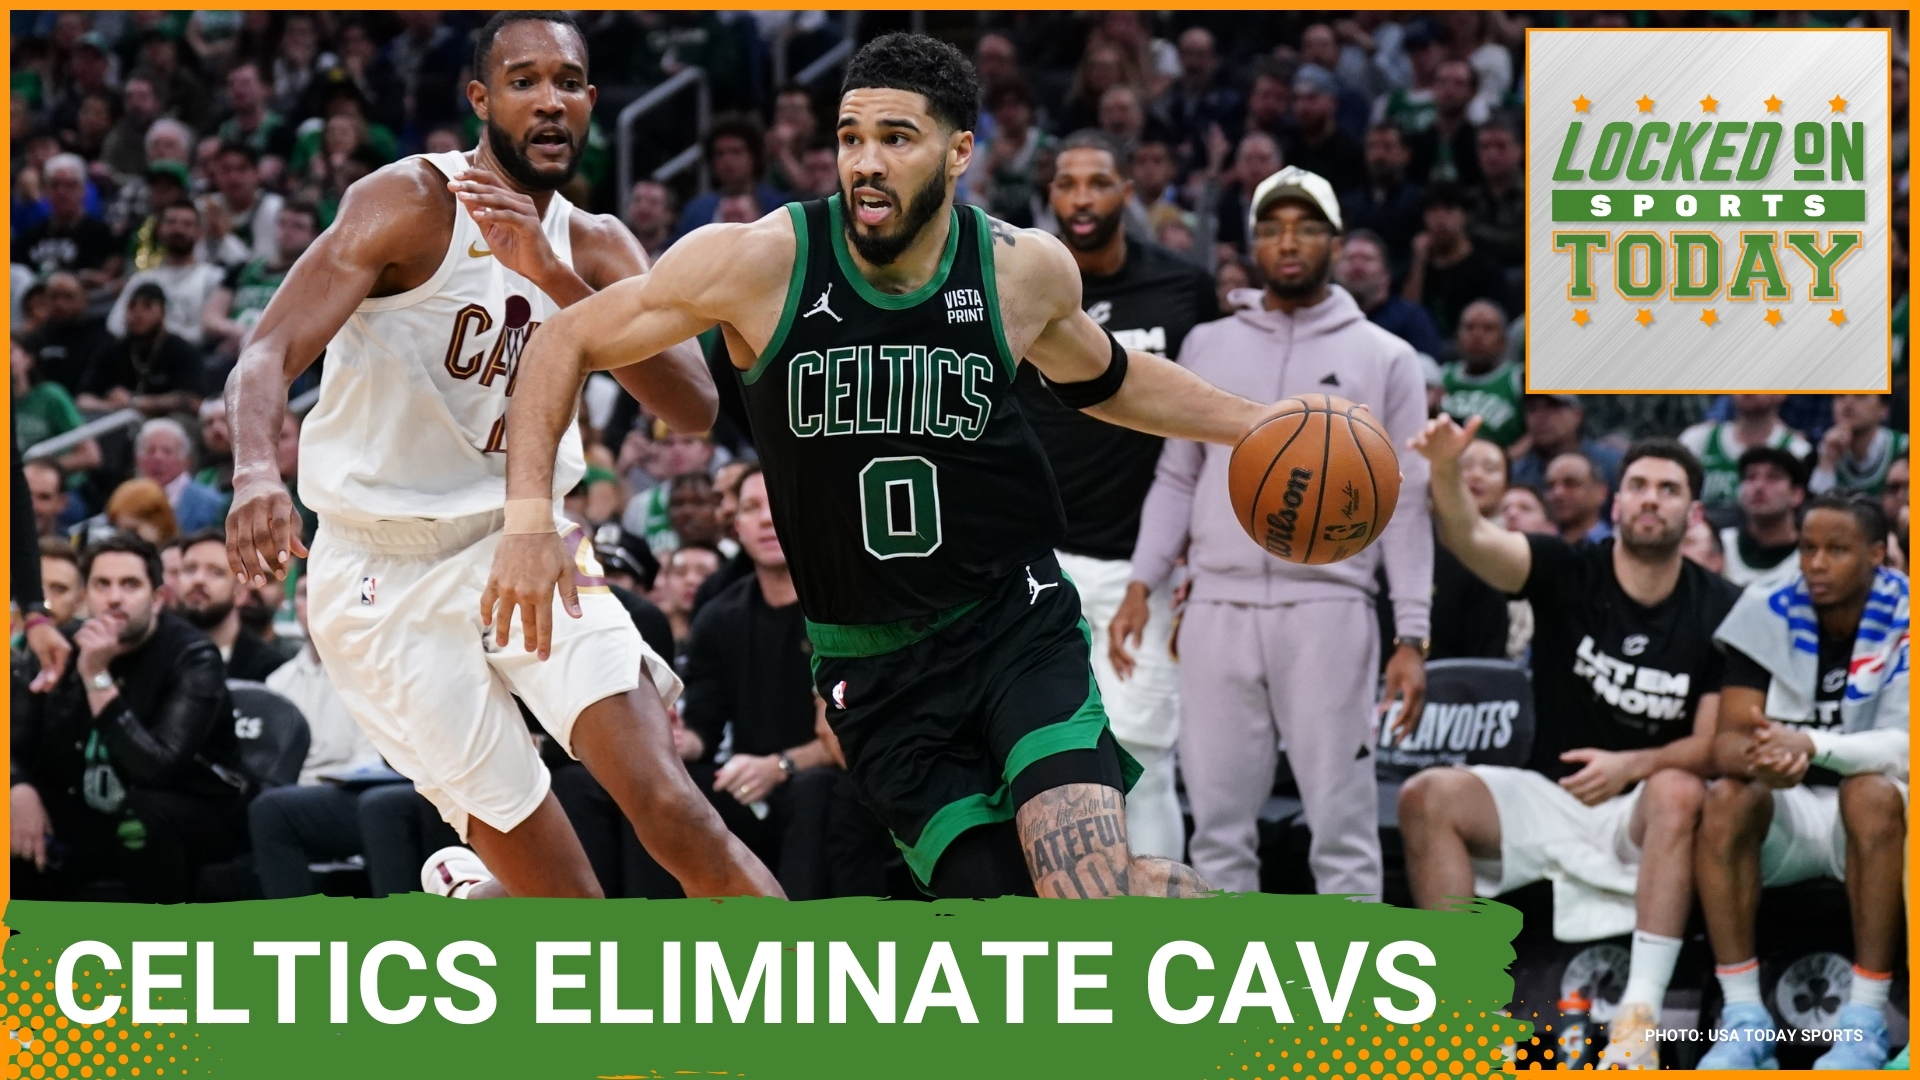 The Boston Celtics started the Donovan Mitchell trade speculation early by dispatching the Cleveland Cavaliers in 5. Luka and the Mavericks shocked the OKC Thunder.